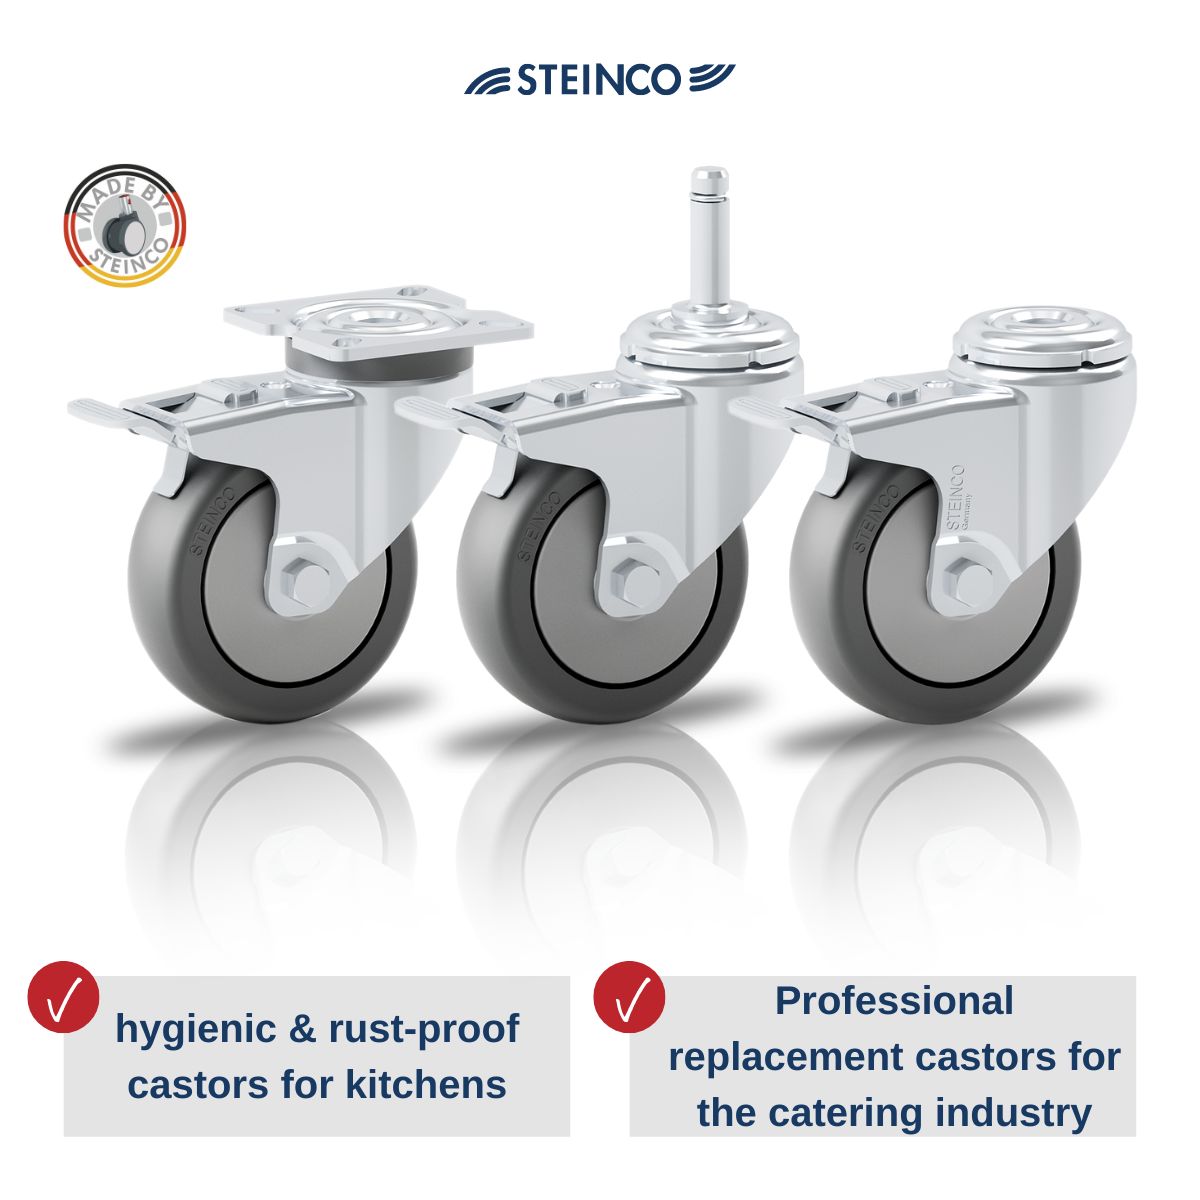 Replacement castors for stainless steel kitchen furniture and trolleys for the food industry, large kitchens, industrial kitchens, catering and canteens.